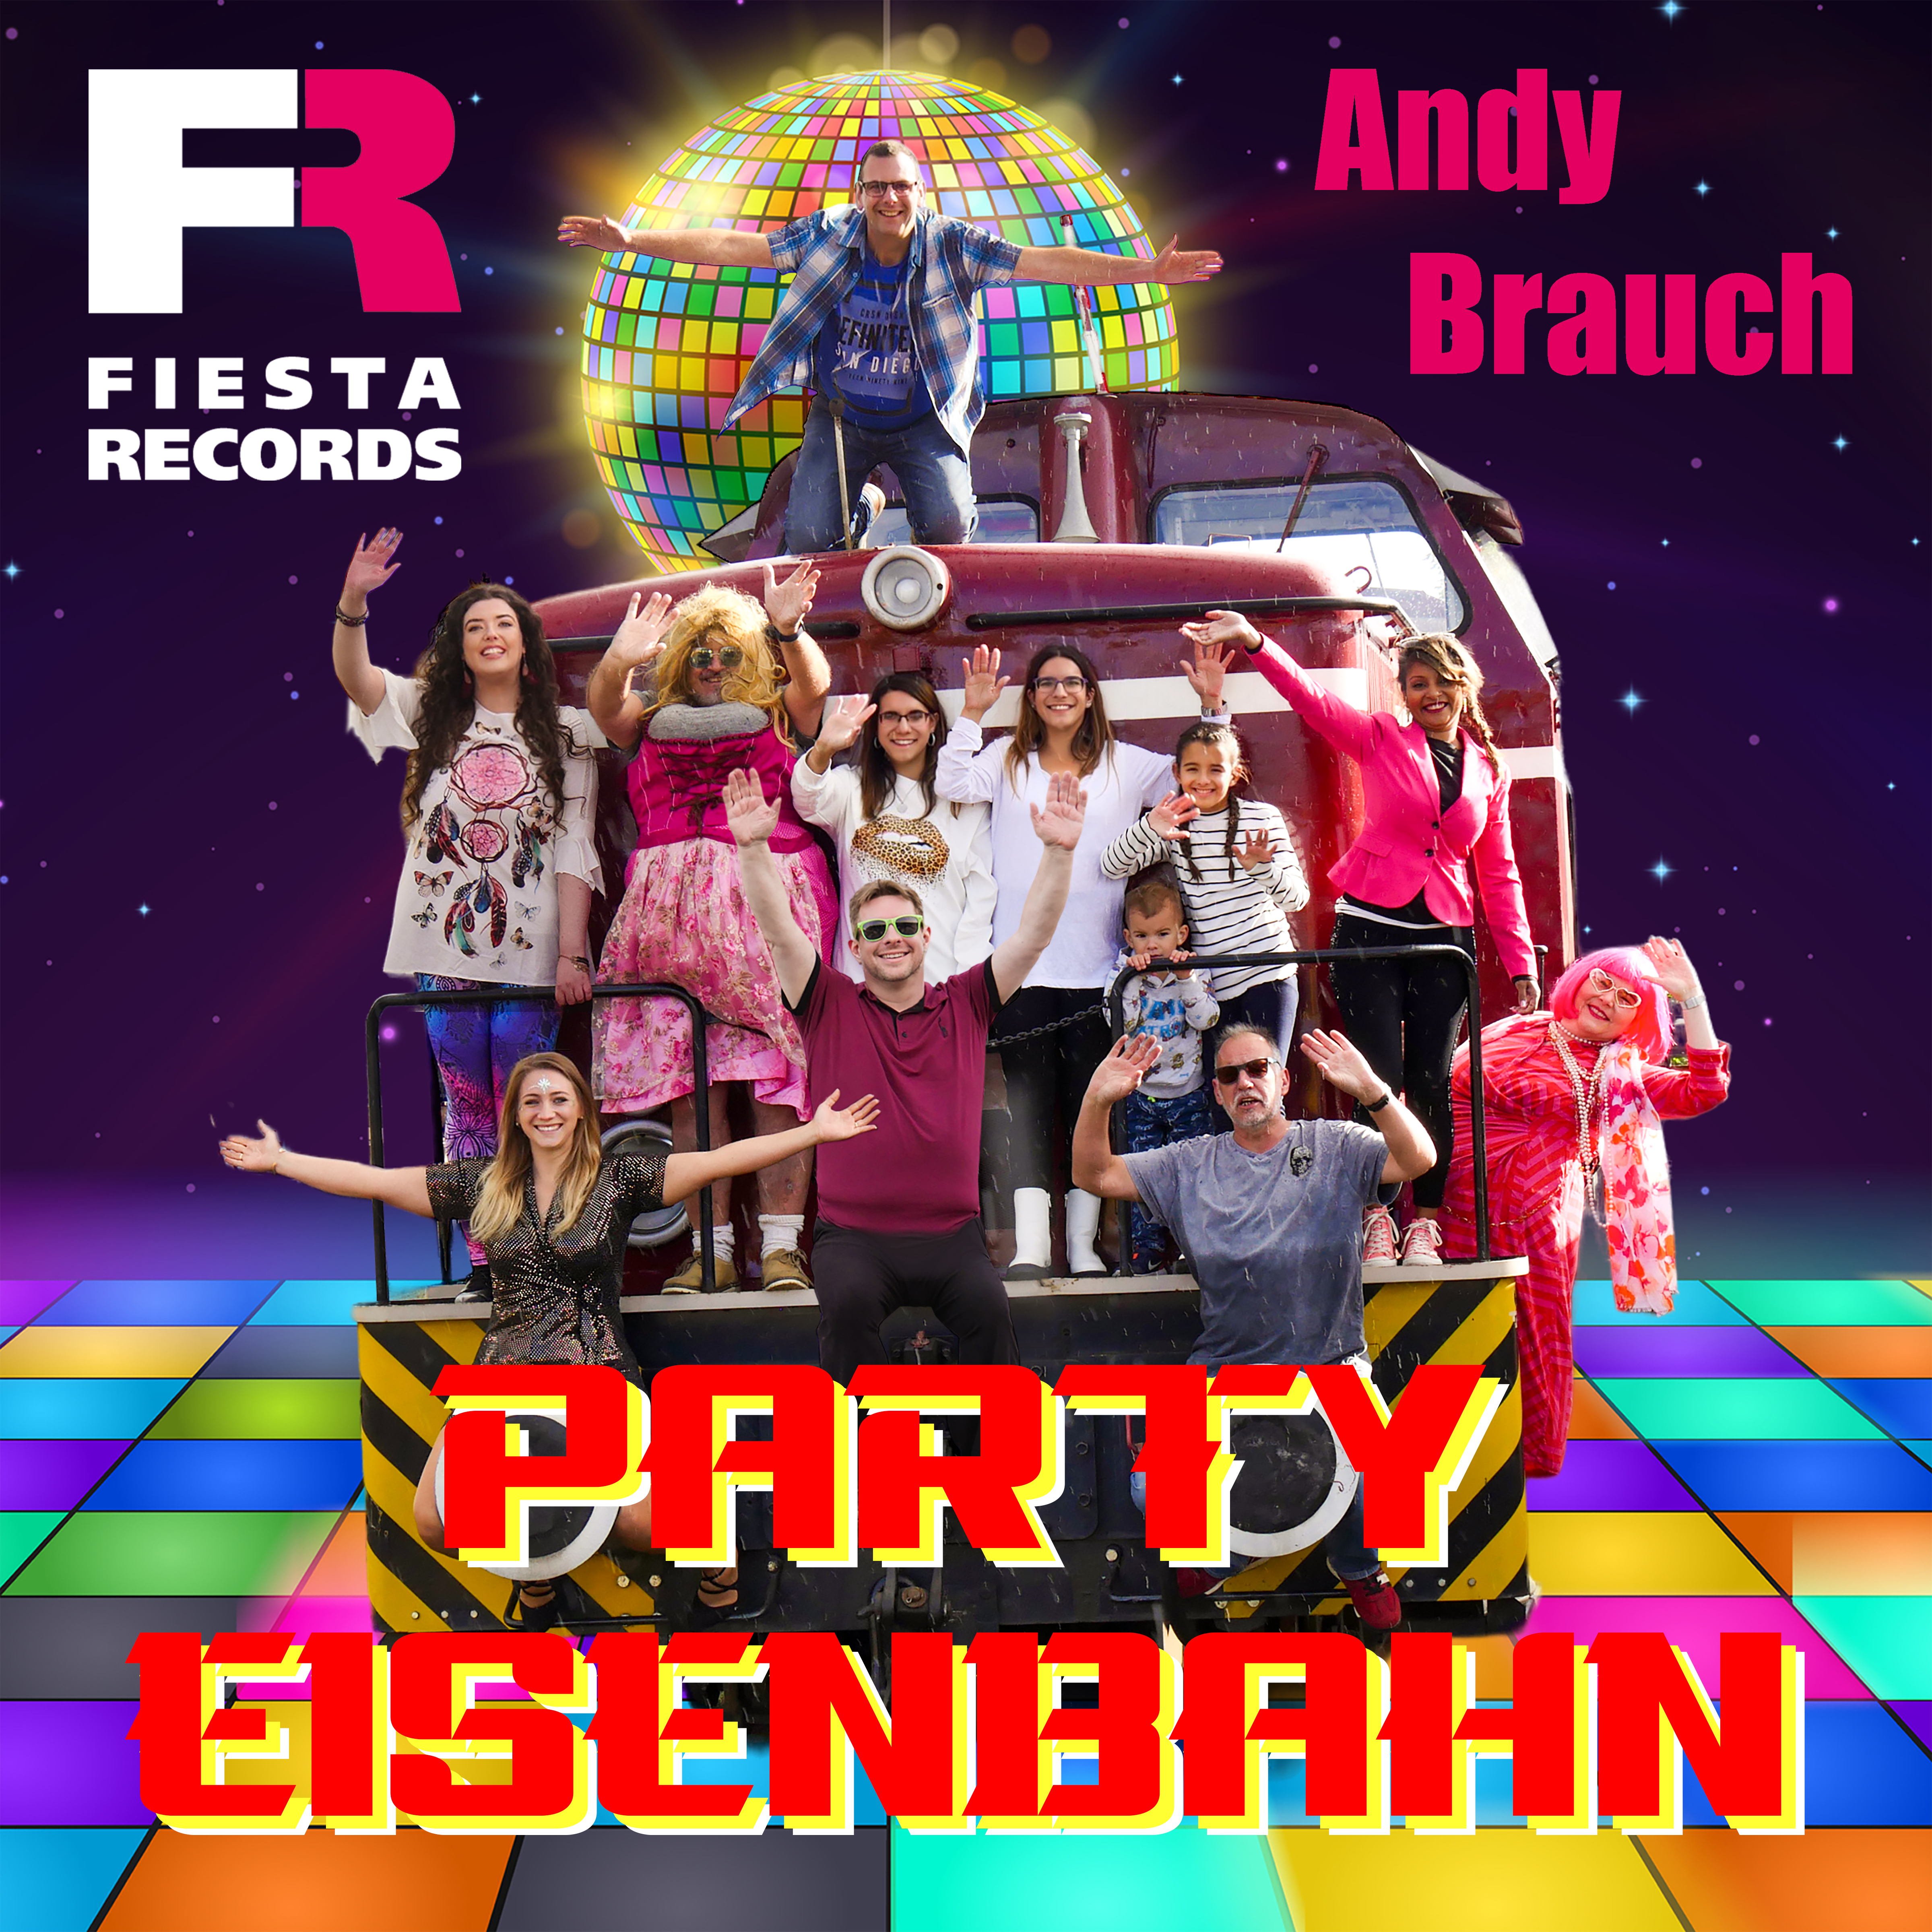 ANDY BRAUCH * Party Eisenbahn (Download-Track) 